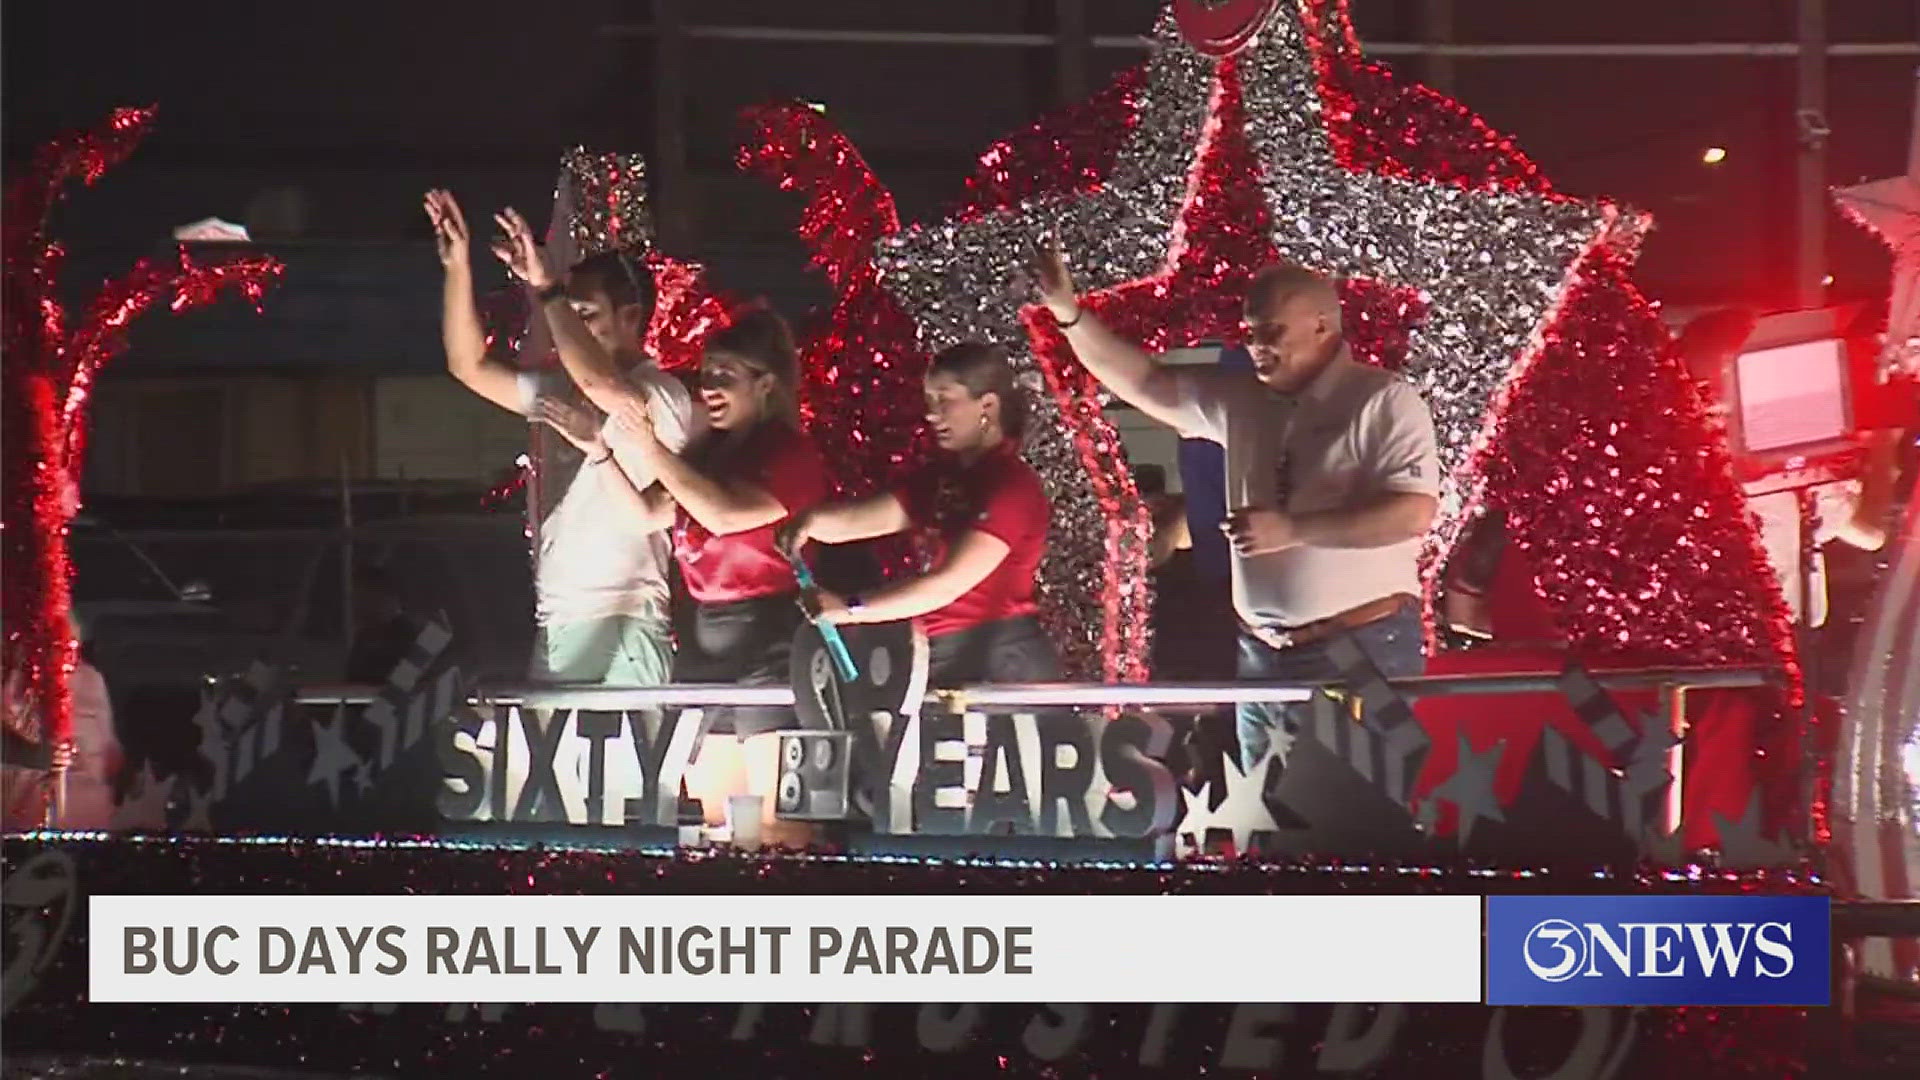 Thousands flooded Leopard St. for this year's annual Rally Night Parade